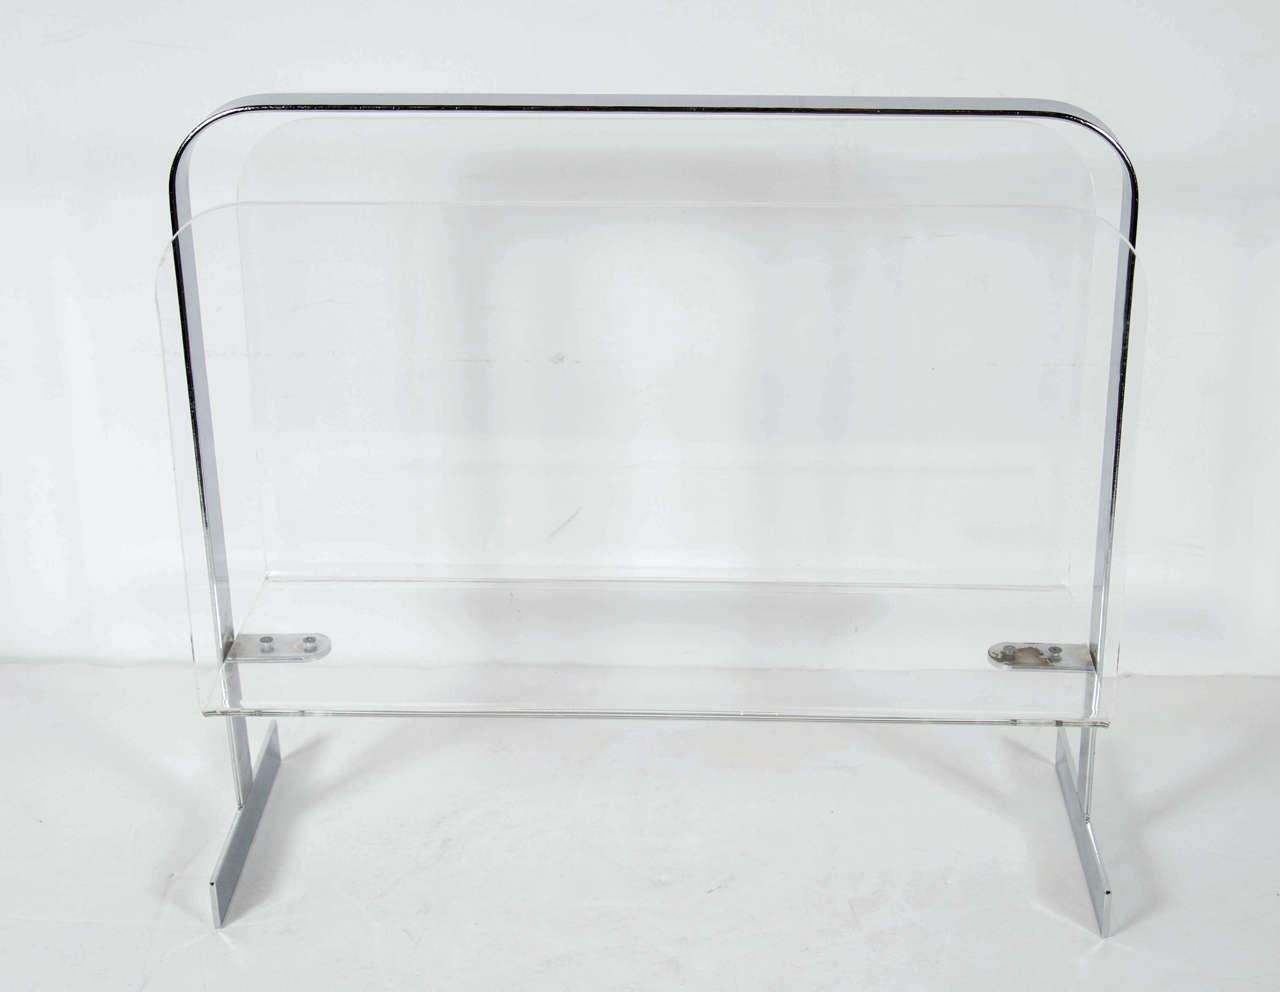 This chic magazine stand features a banded chrome T-form support that has Lucite supports. The Lucite has a curved corner detail and a very Art Deco inspiration.